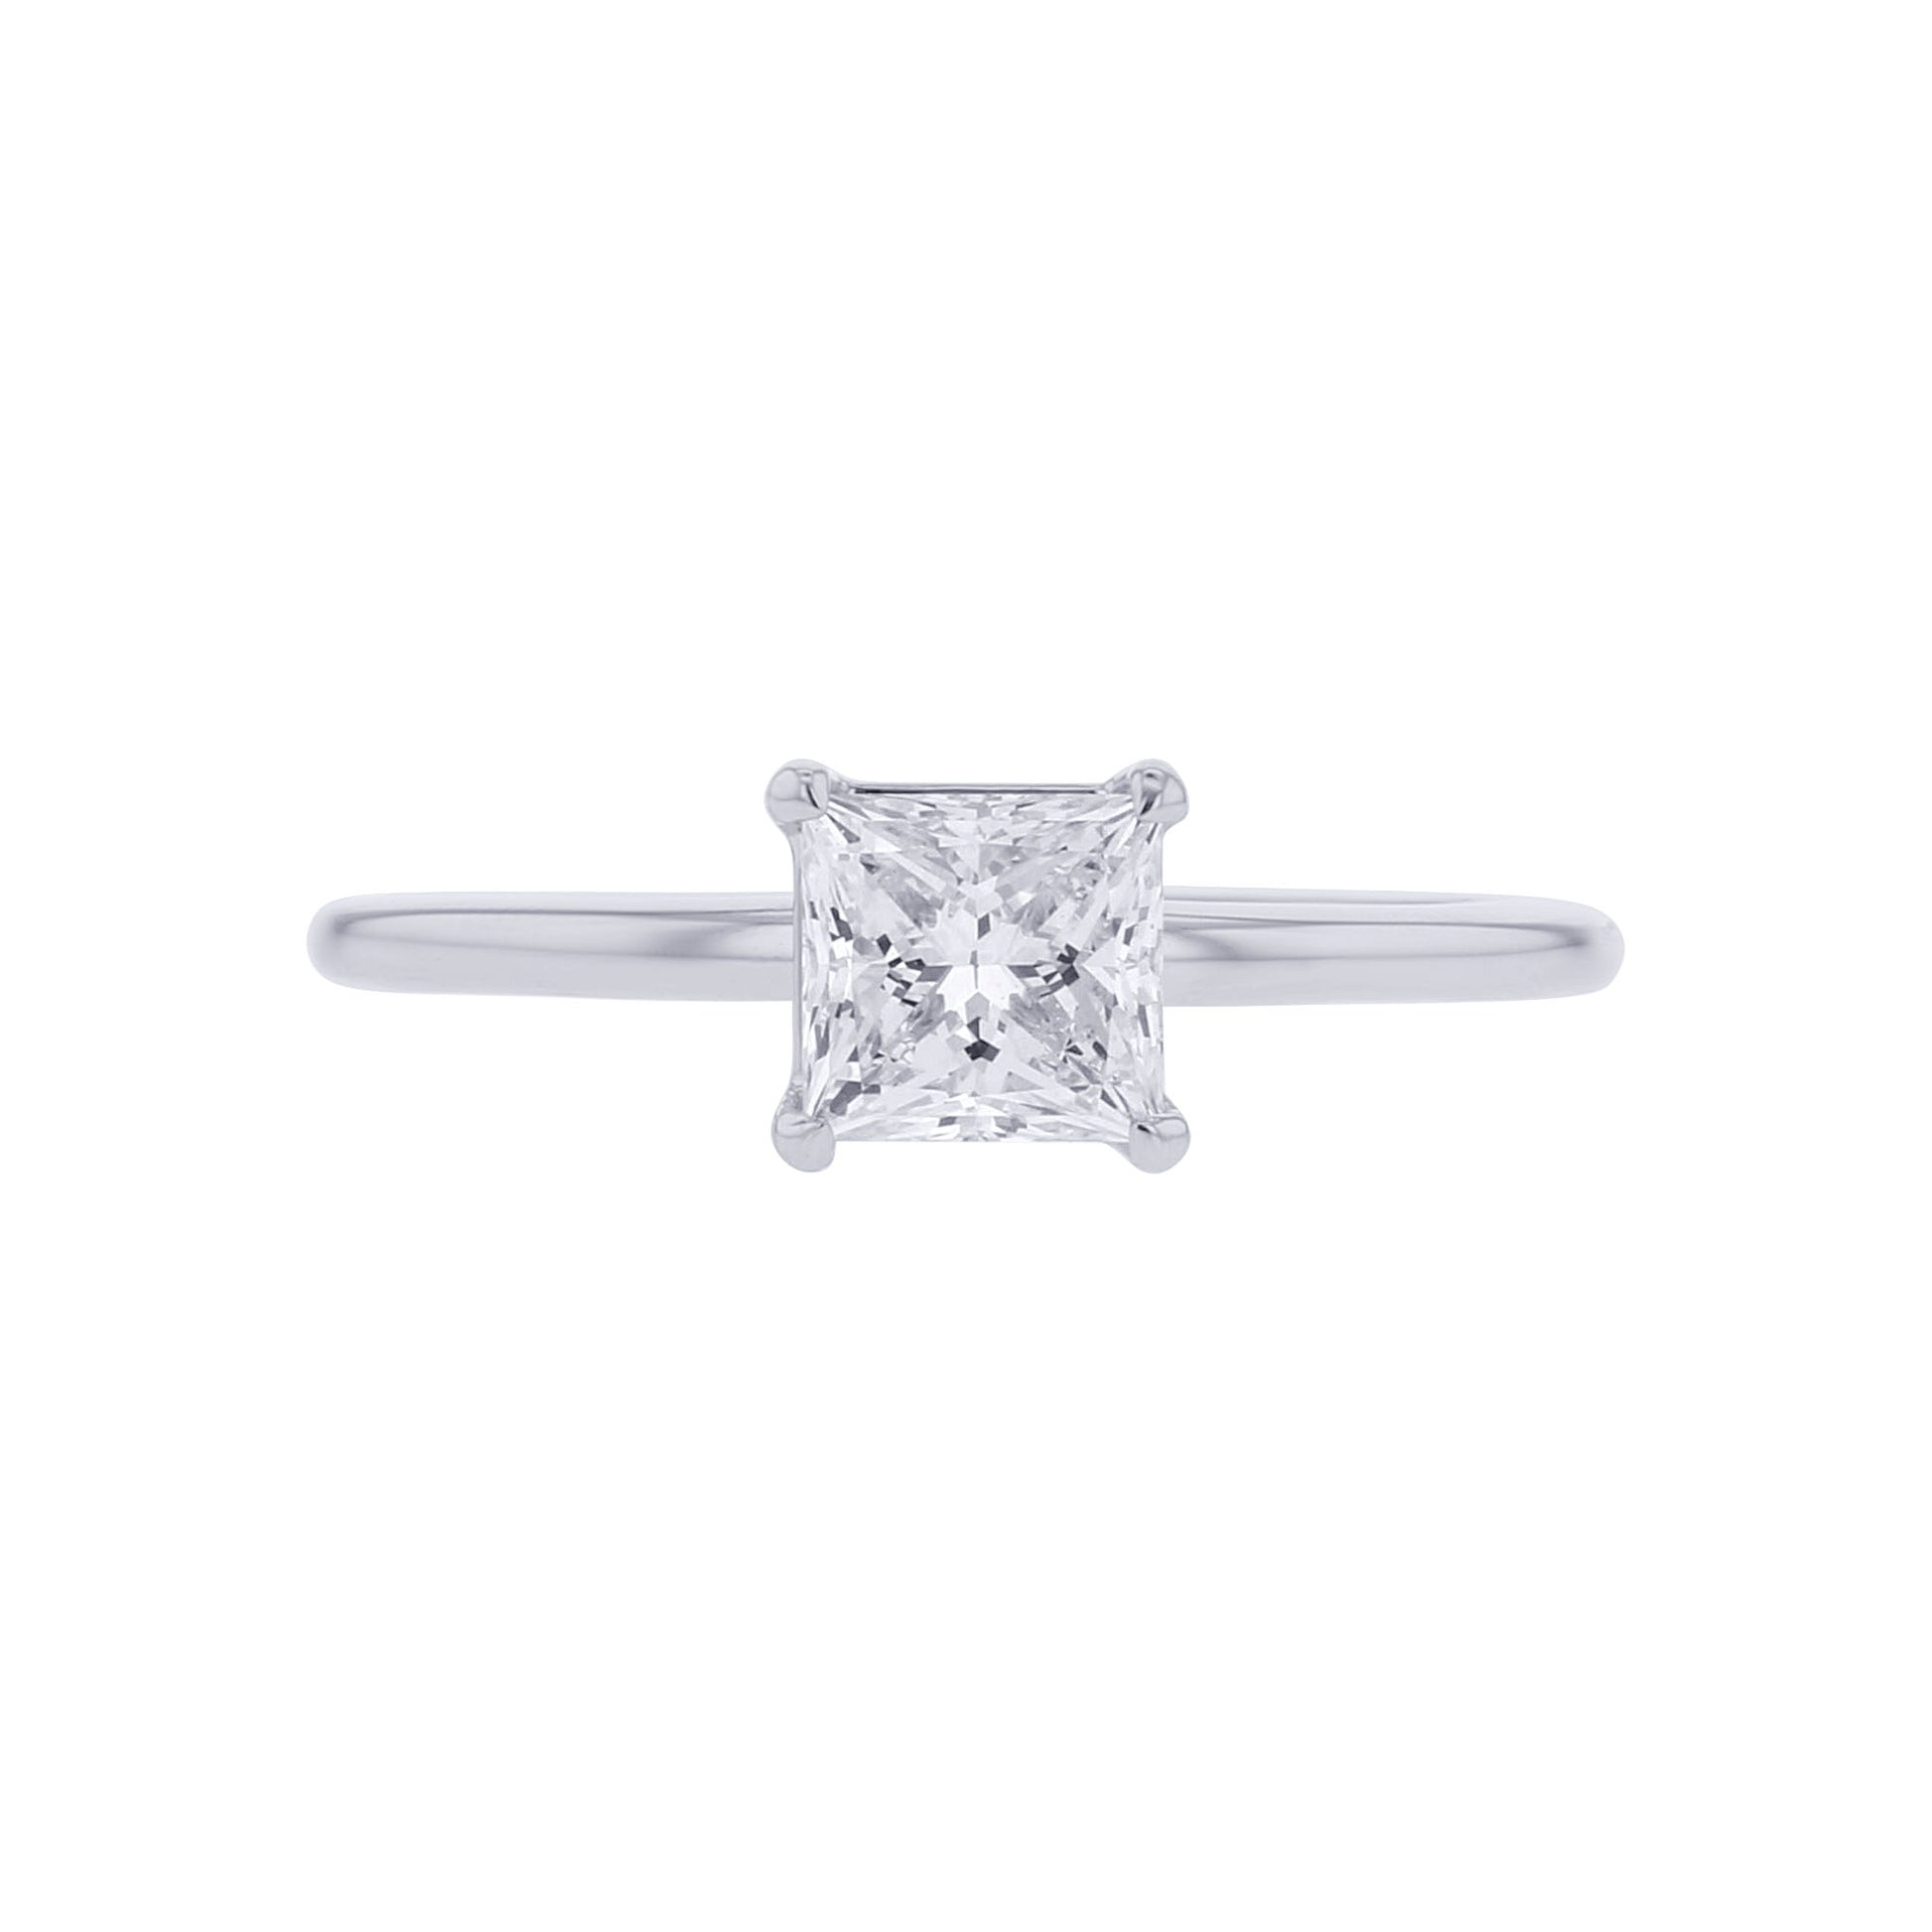 Ember Princess Ready for Love Diamond Engagement Ring 1ct